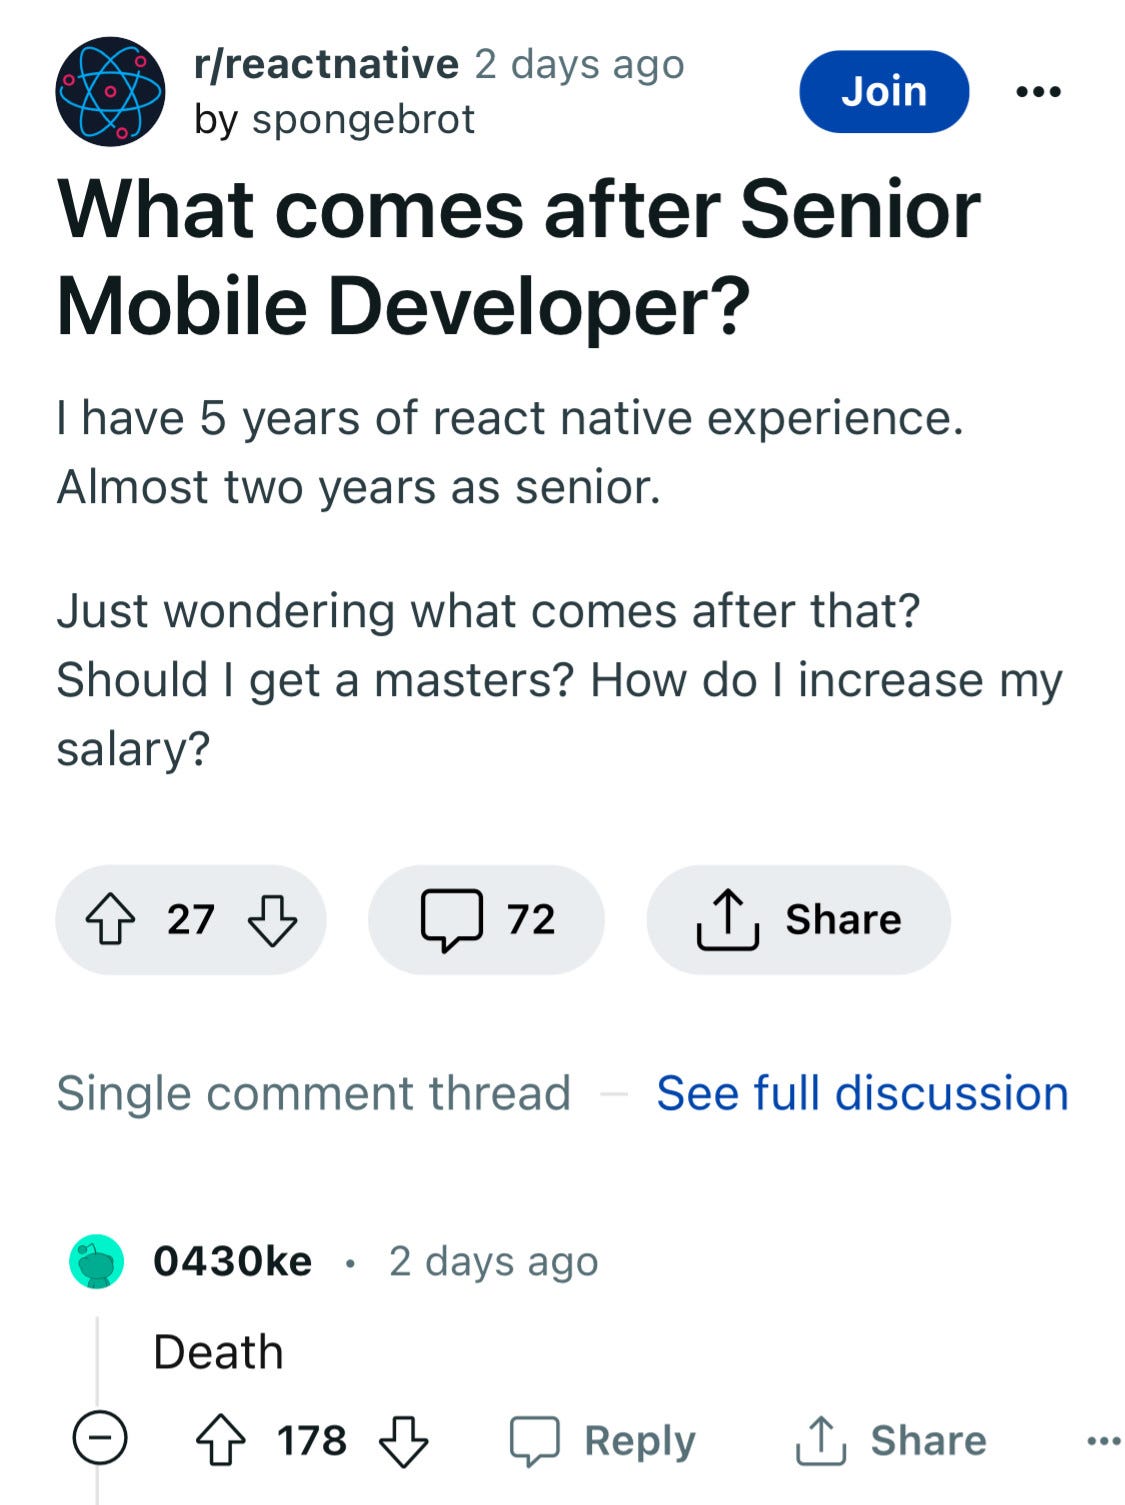 A thread on Reddit /r/reactnative community.The post: "What comes after Senior Mobile Developer? I have 5 years of react native experience. Almost two years as senior. Just wondering what comes after that? Should I get a masters? How do I increase my salary?"One of the comments: "Death"